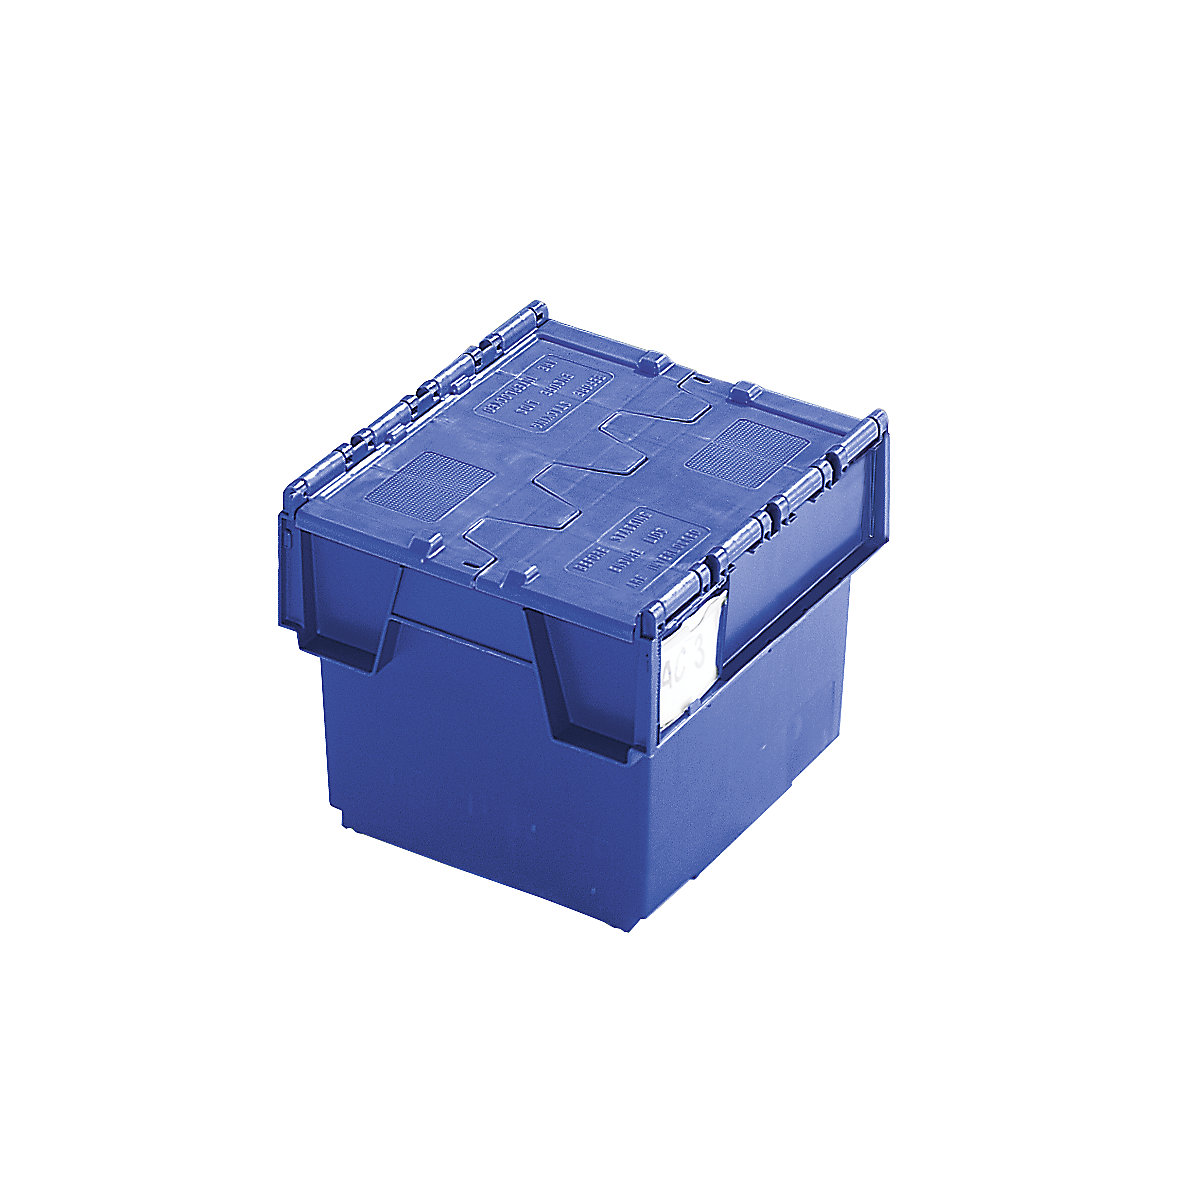 KAIMAN reusable stacking container, capacity 20 litres, LxWxH 400 x 300 x 252 mm, blue